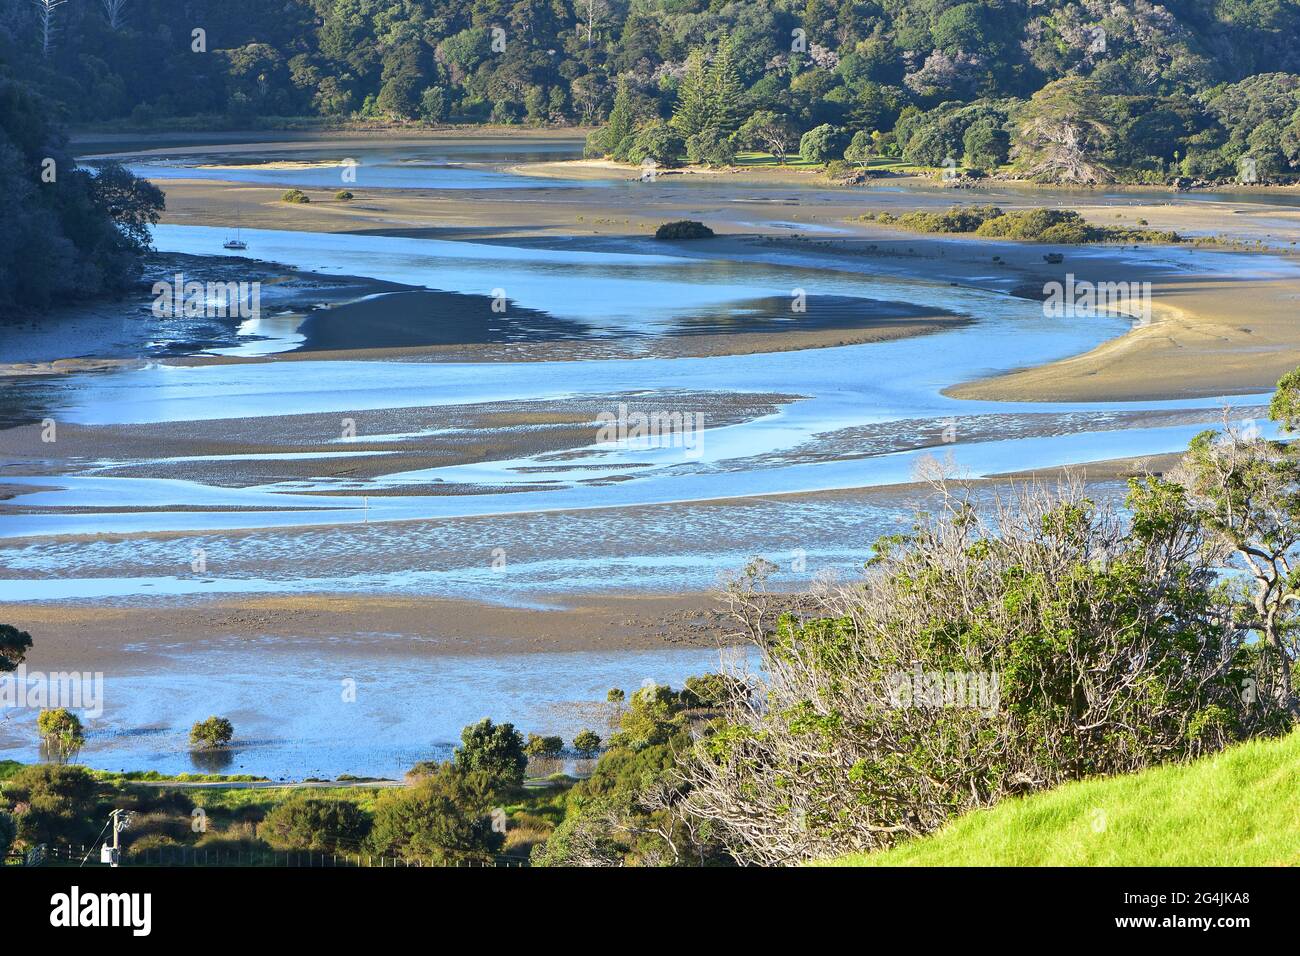 Tidal river meandering through estuary among mudflats exposed at low tide. Stock Photo